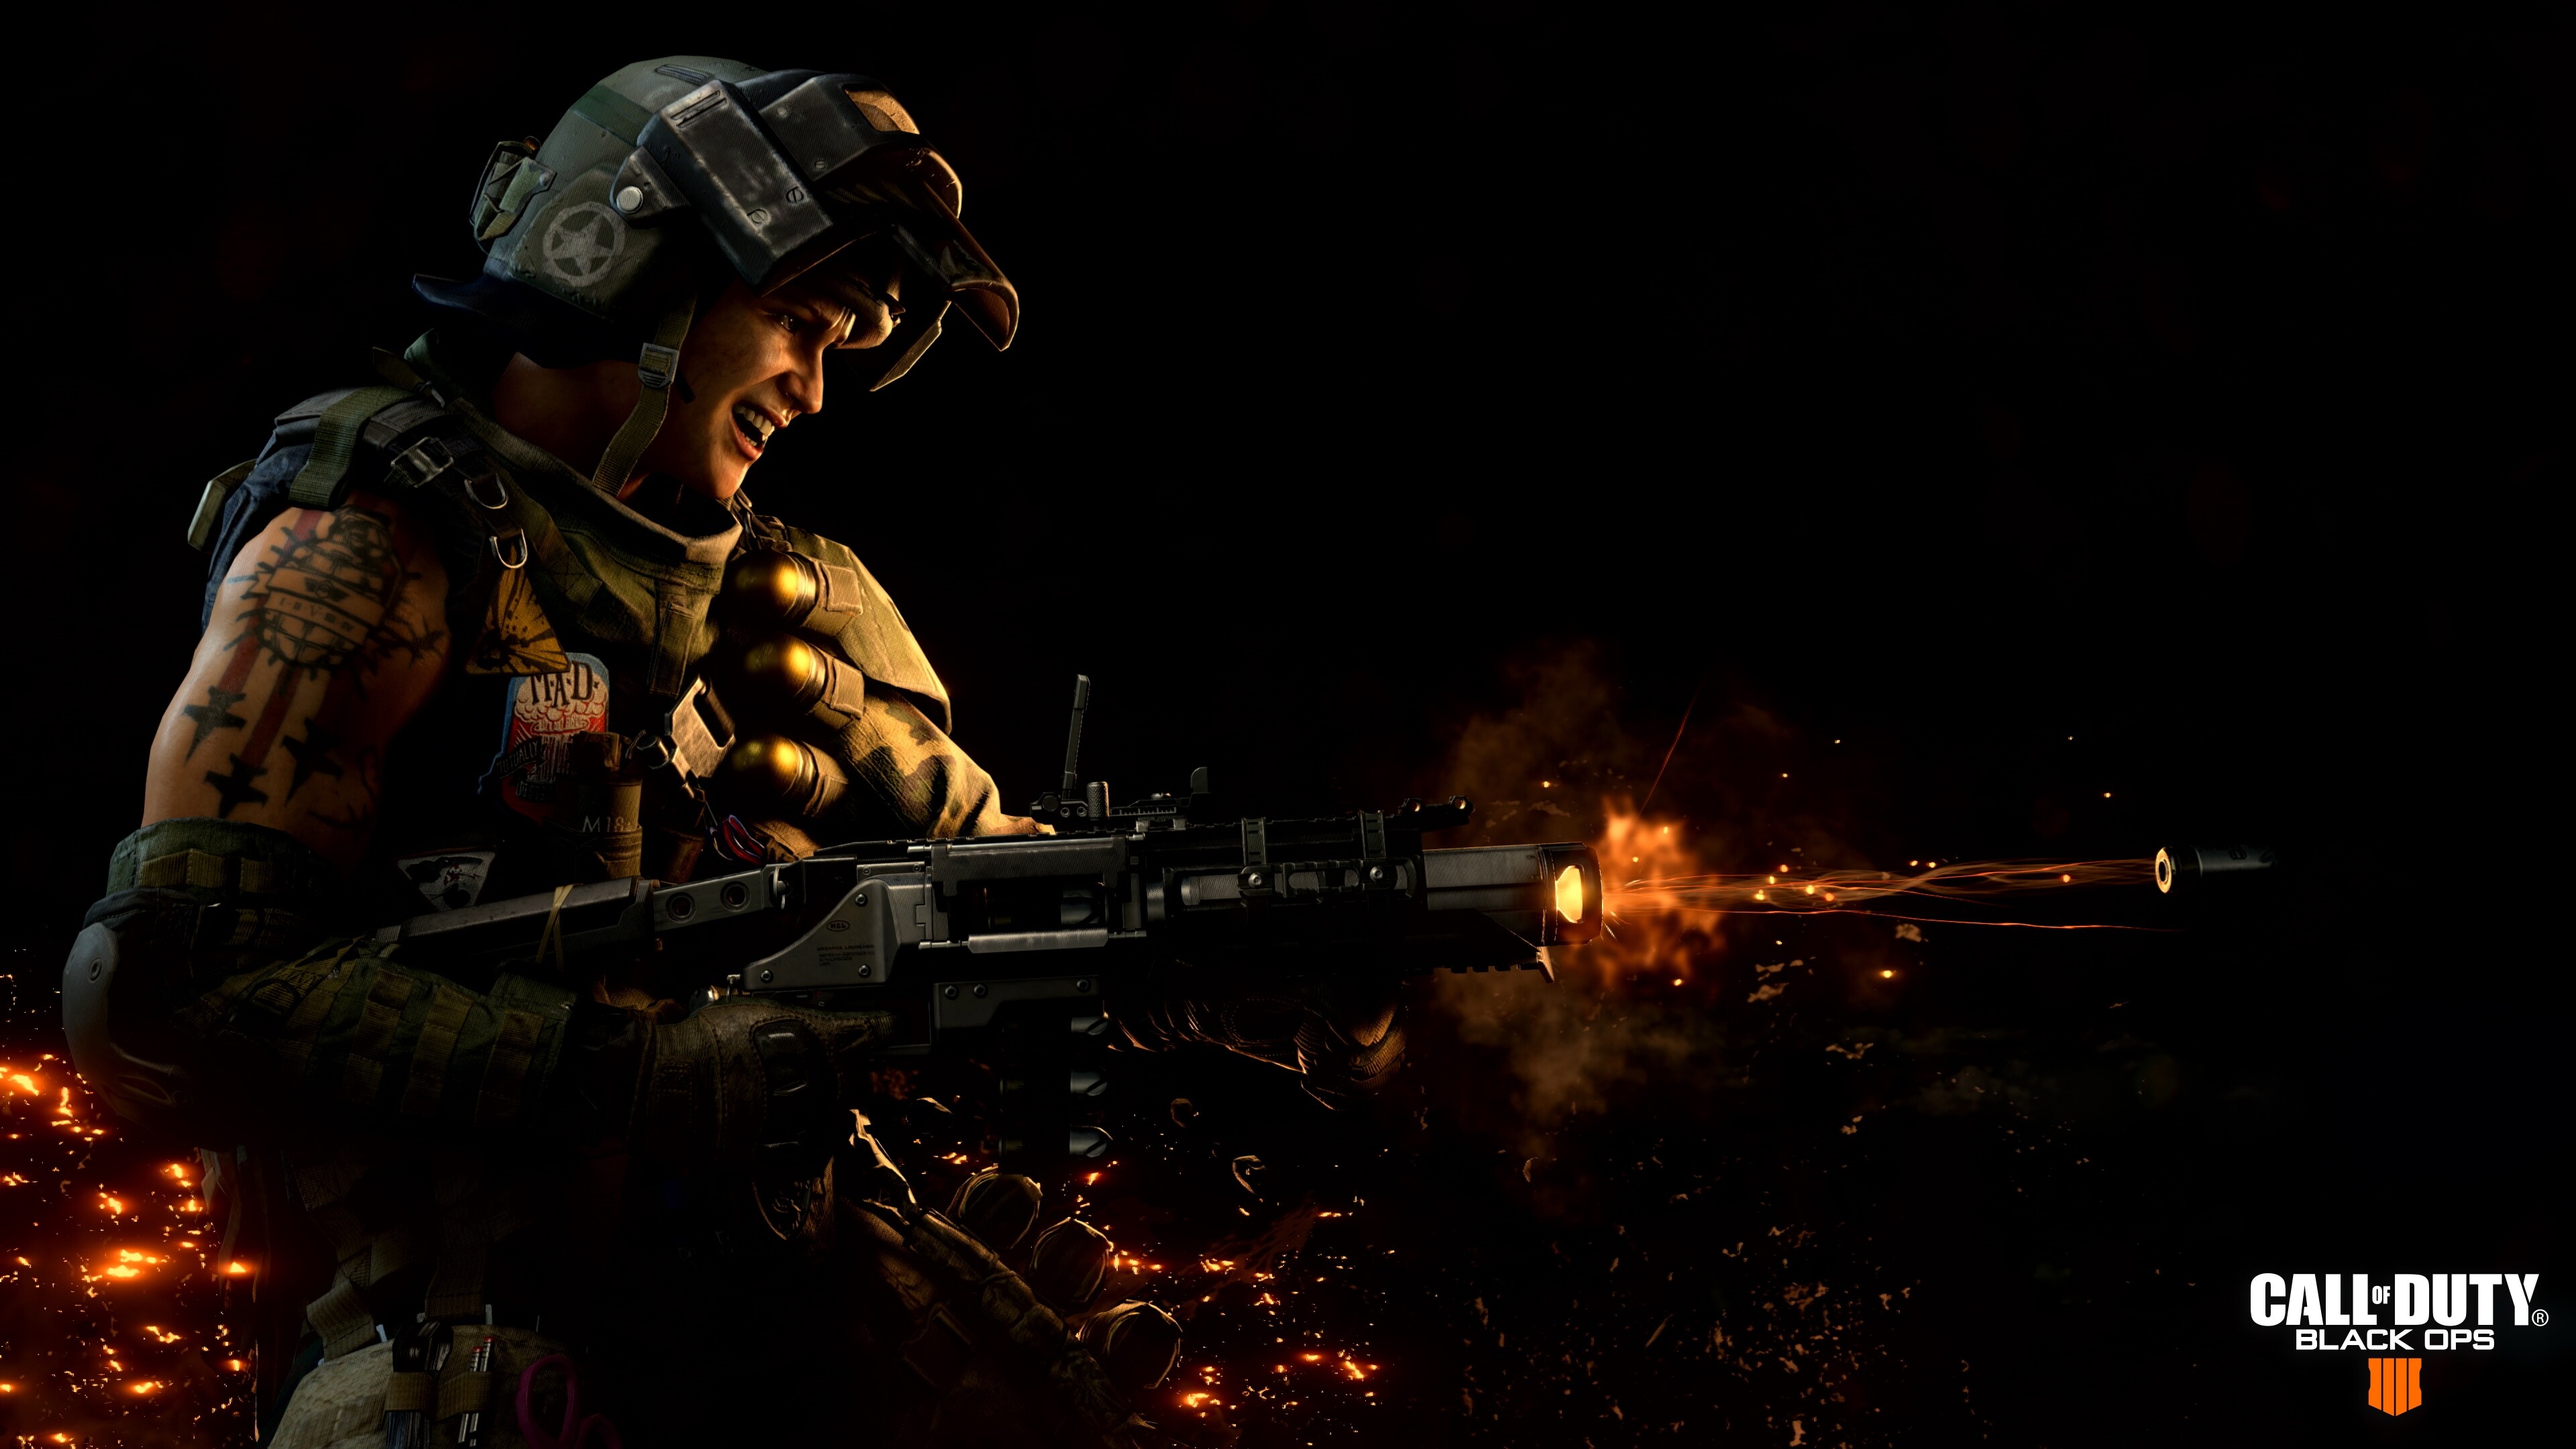 Call of Duty, Black Ops 4, Thrilling blackout mode, Action-packed wallpapers, 3840x2160 4K Desktop